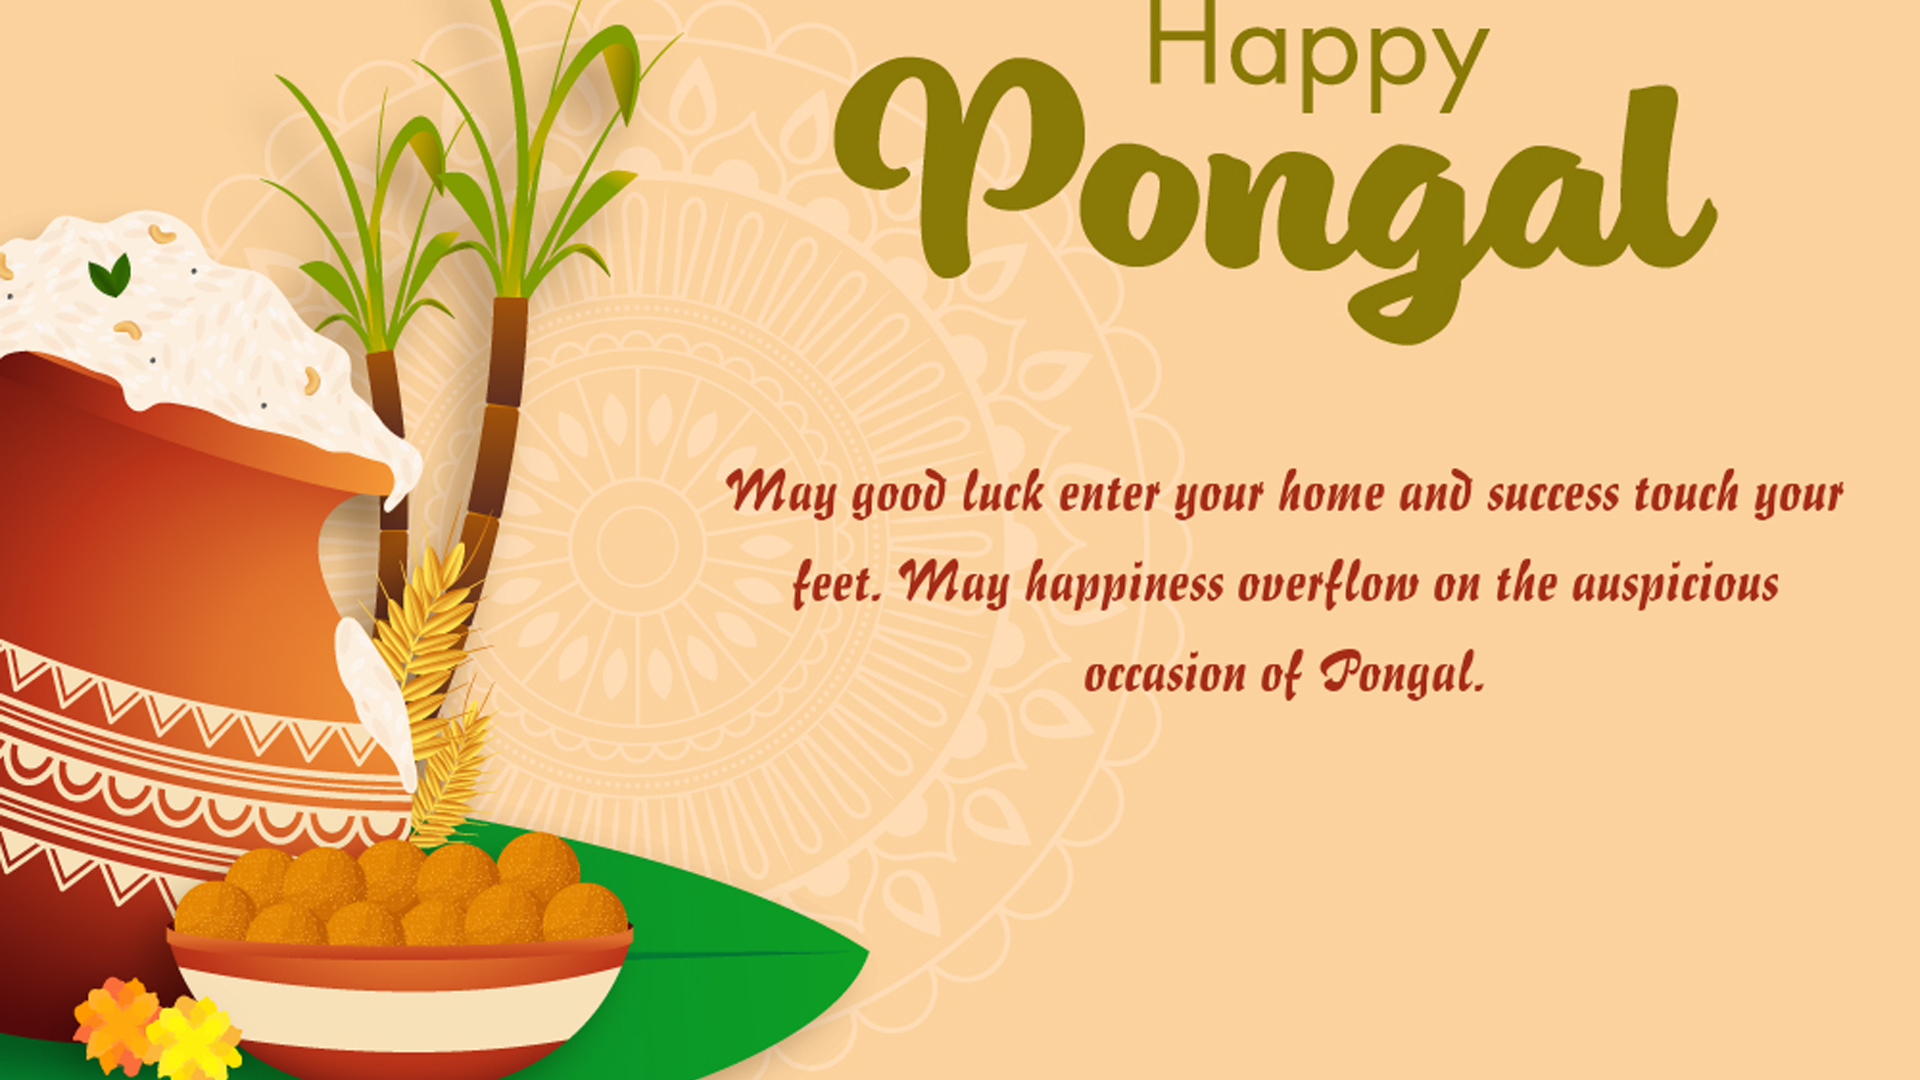 May Good Luck Enter Your Home And Success Touch Your Feet May Happiness Overflow On The Auspicious Occasion Of Pongal HD Pongal